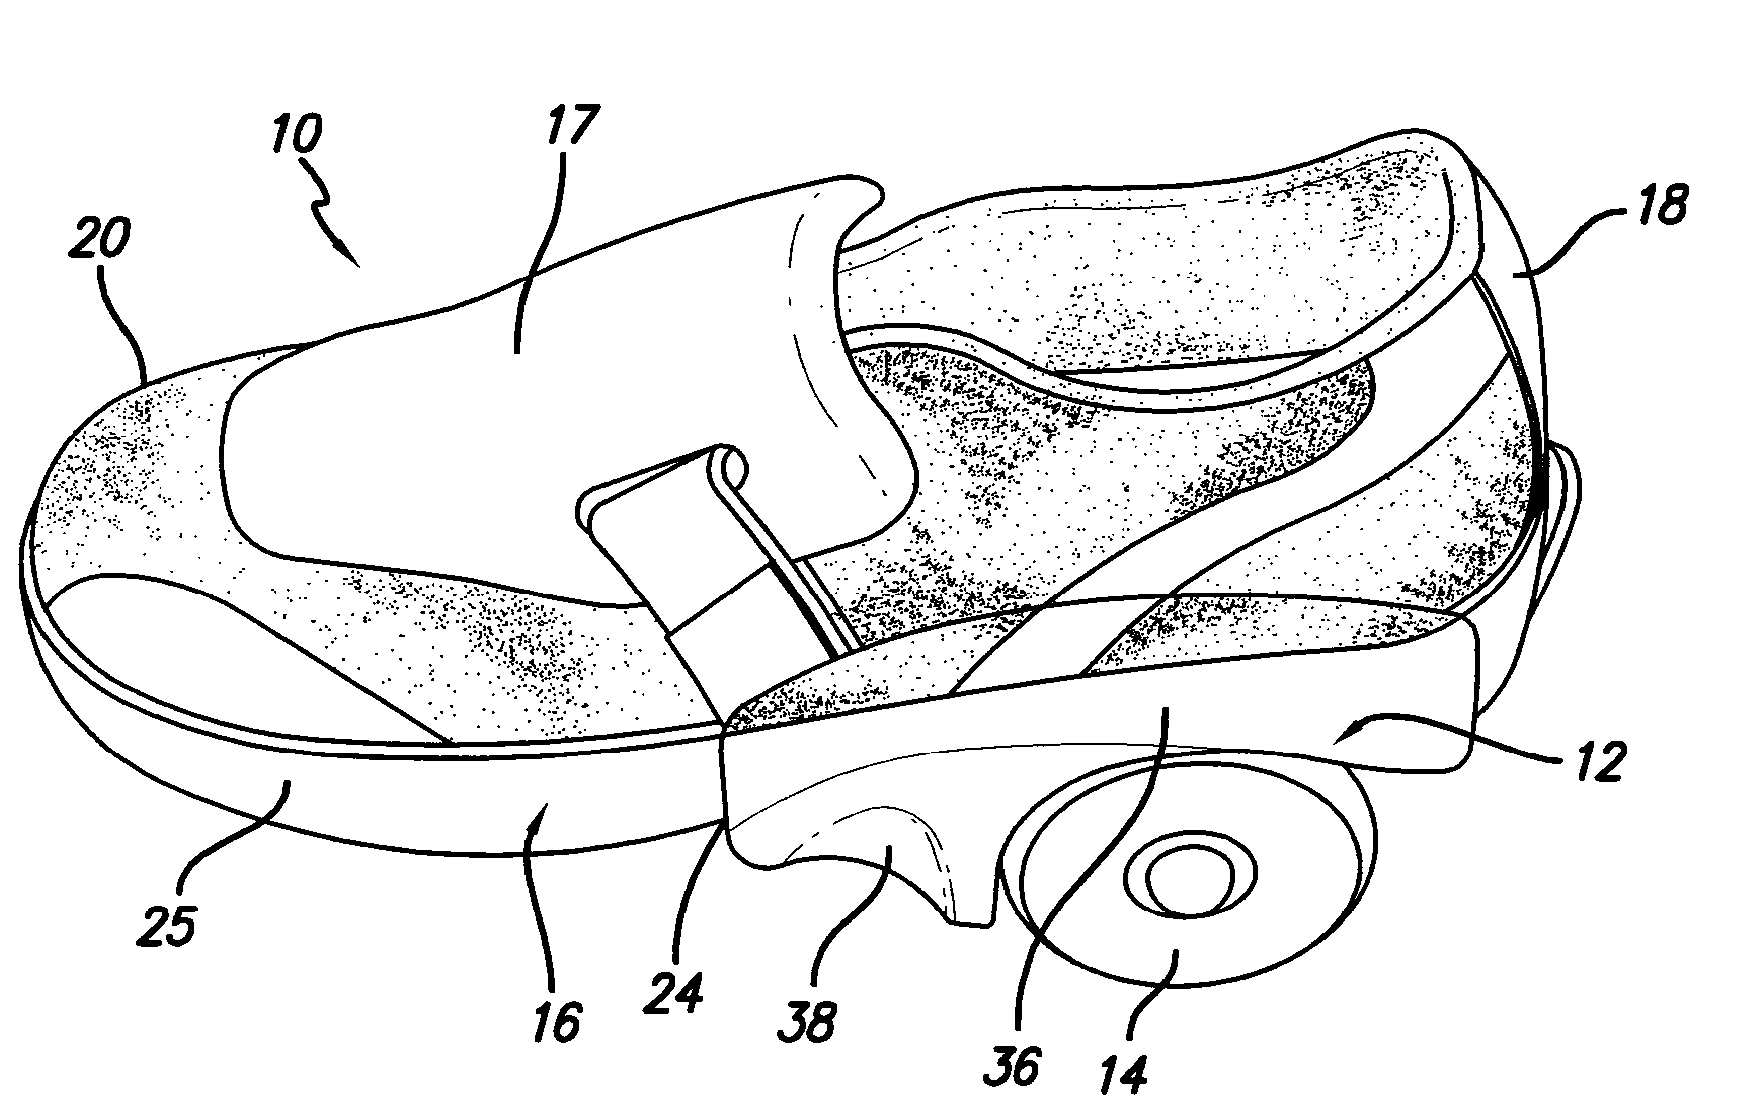 Footwear with adjustable wheel assembly